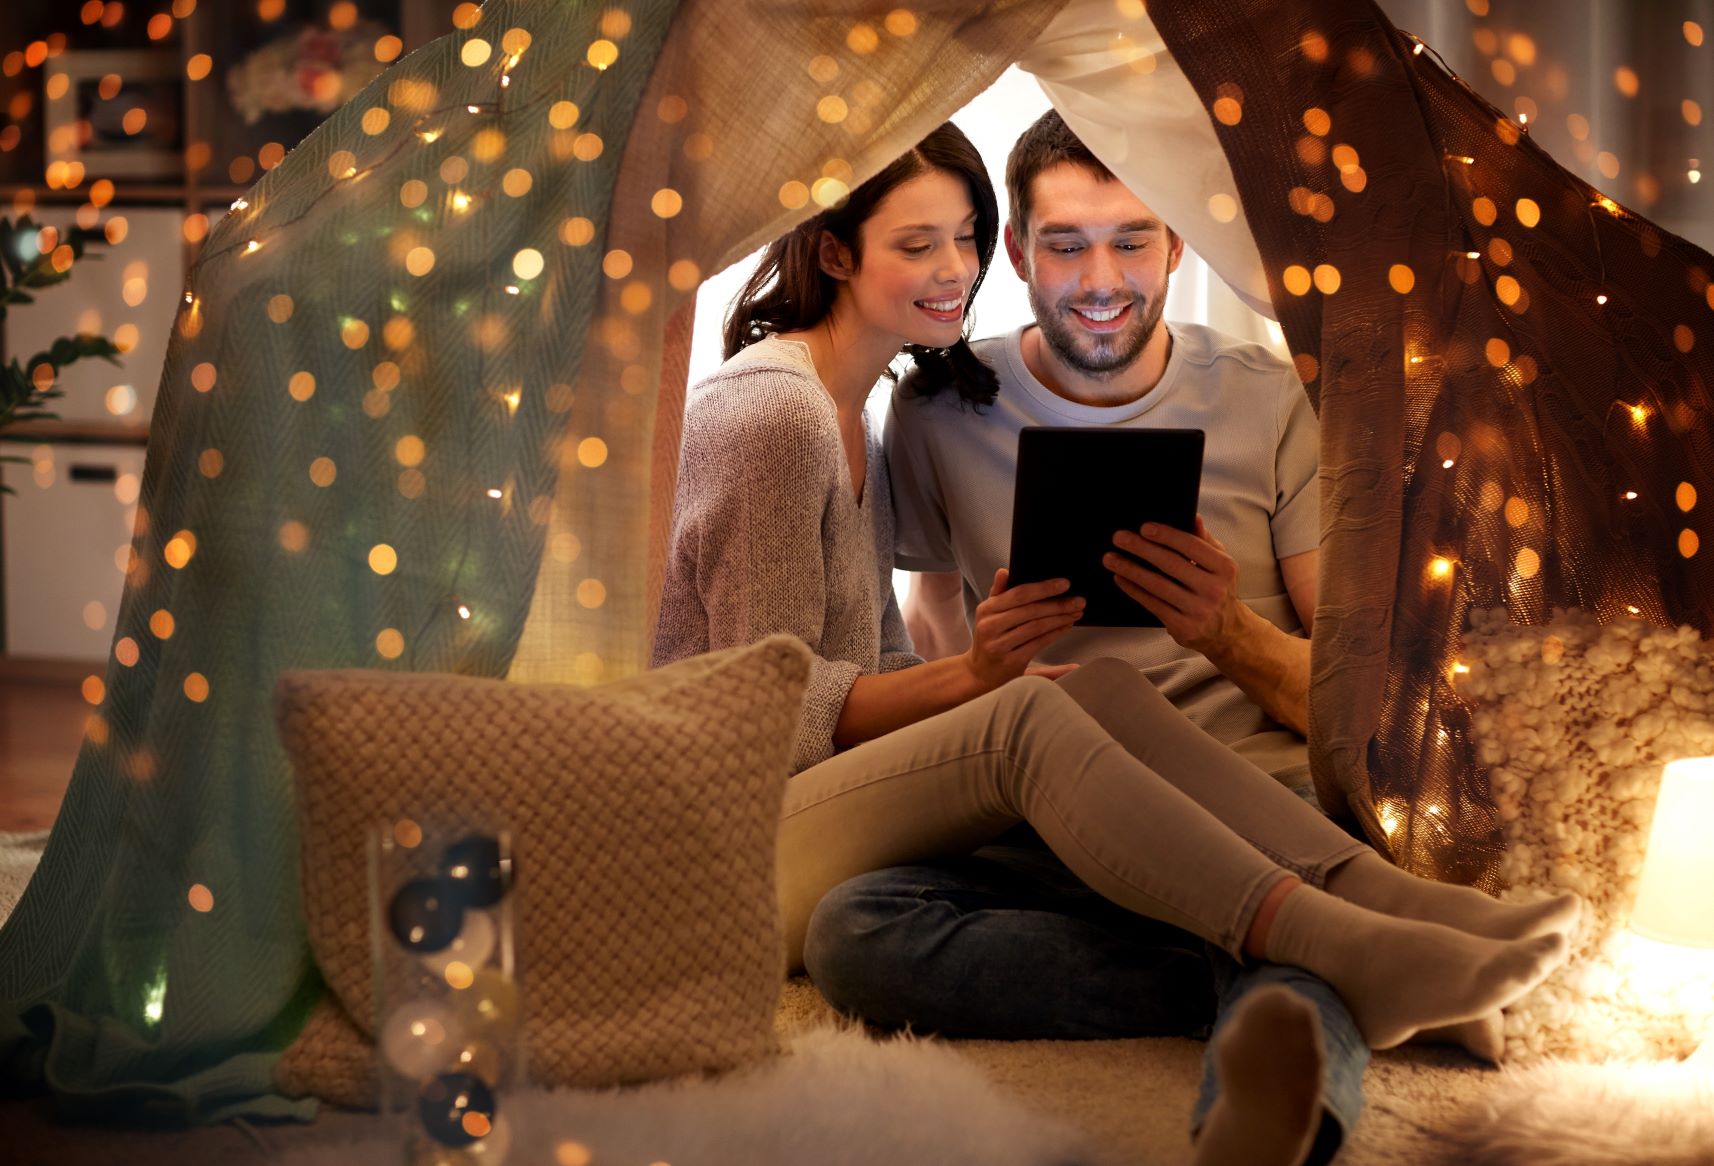 Man and woman cuddling while reading a tablet under sparkly lights.